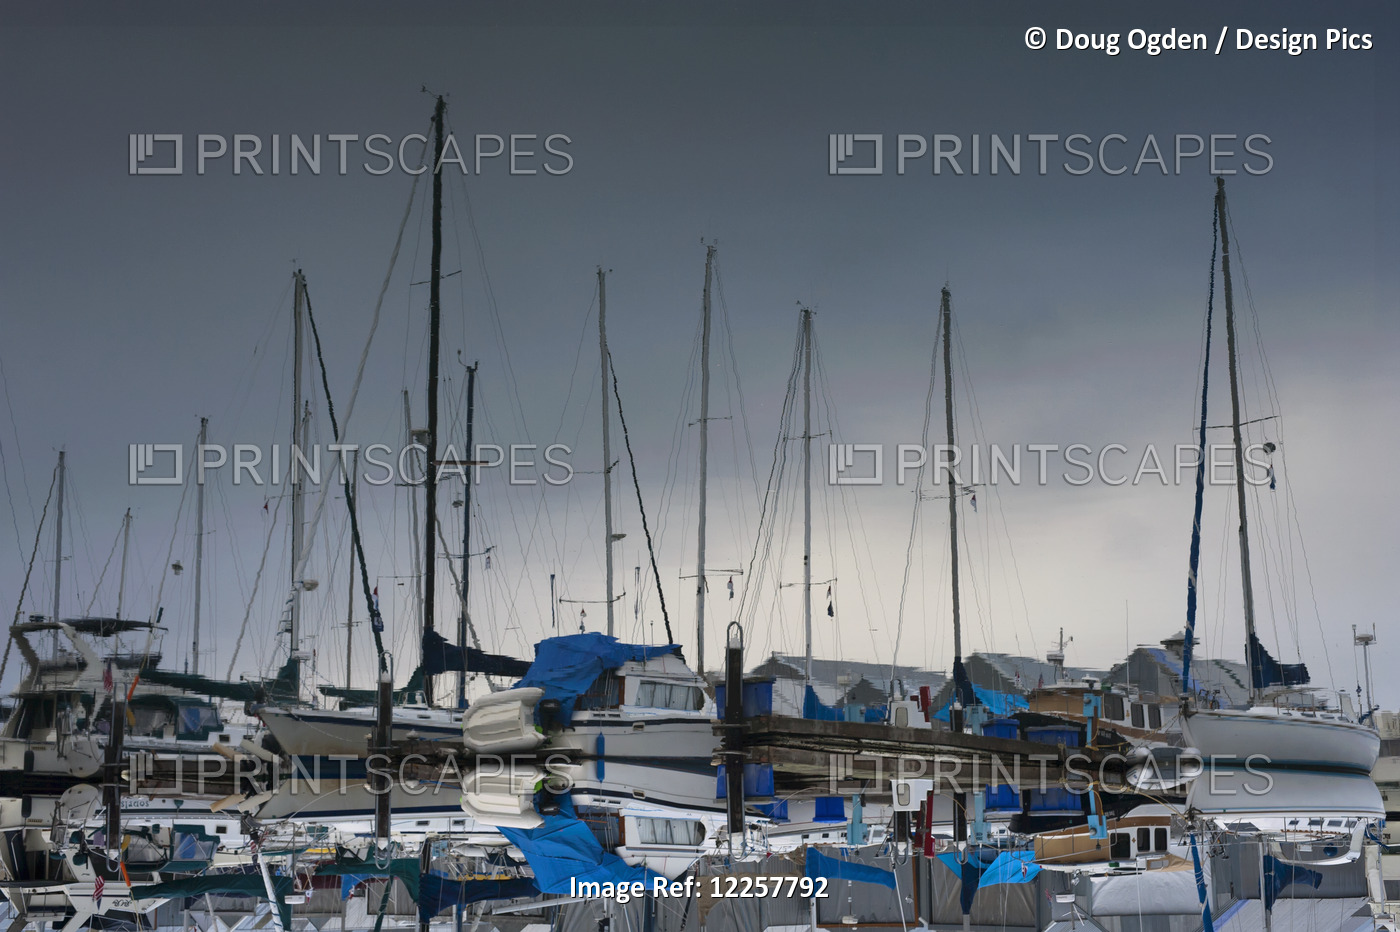 Mirror Image Reflection Of Sailboats In Tranquil Water; Olympia, Washington, ...